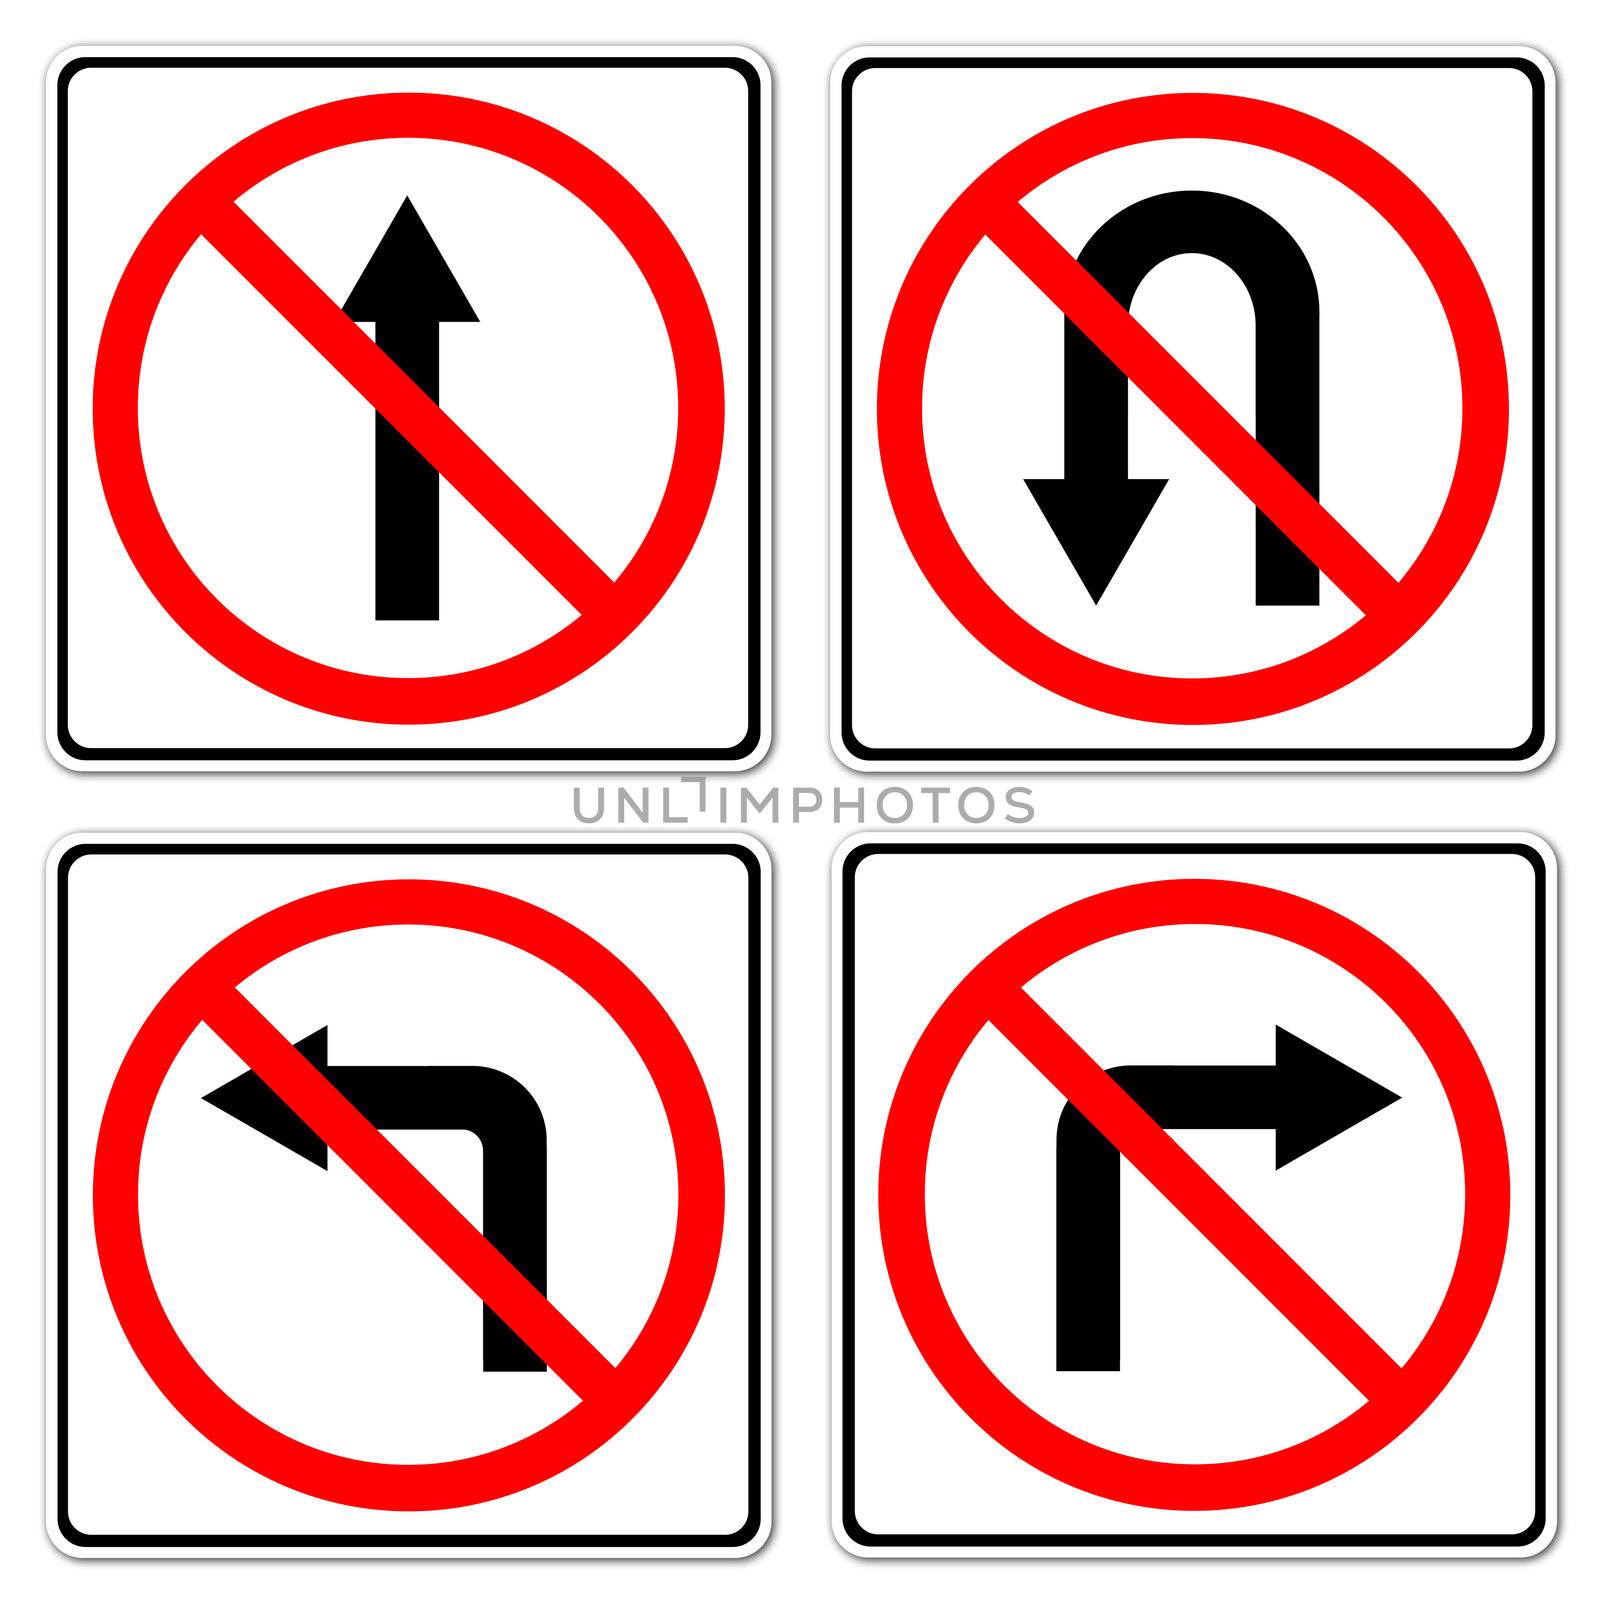 4 Do not do on red circle traffic sign on white background